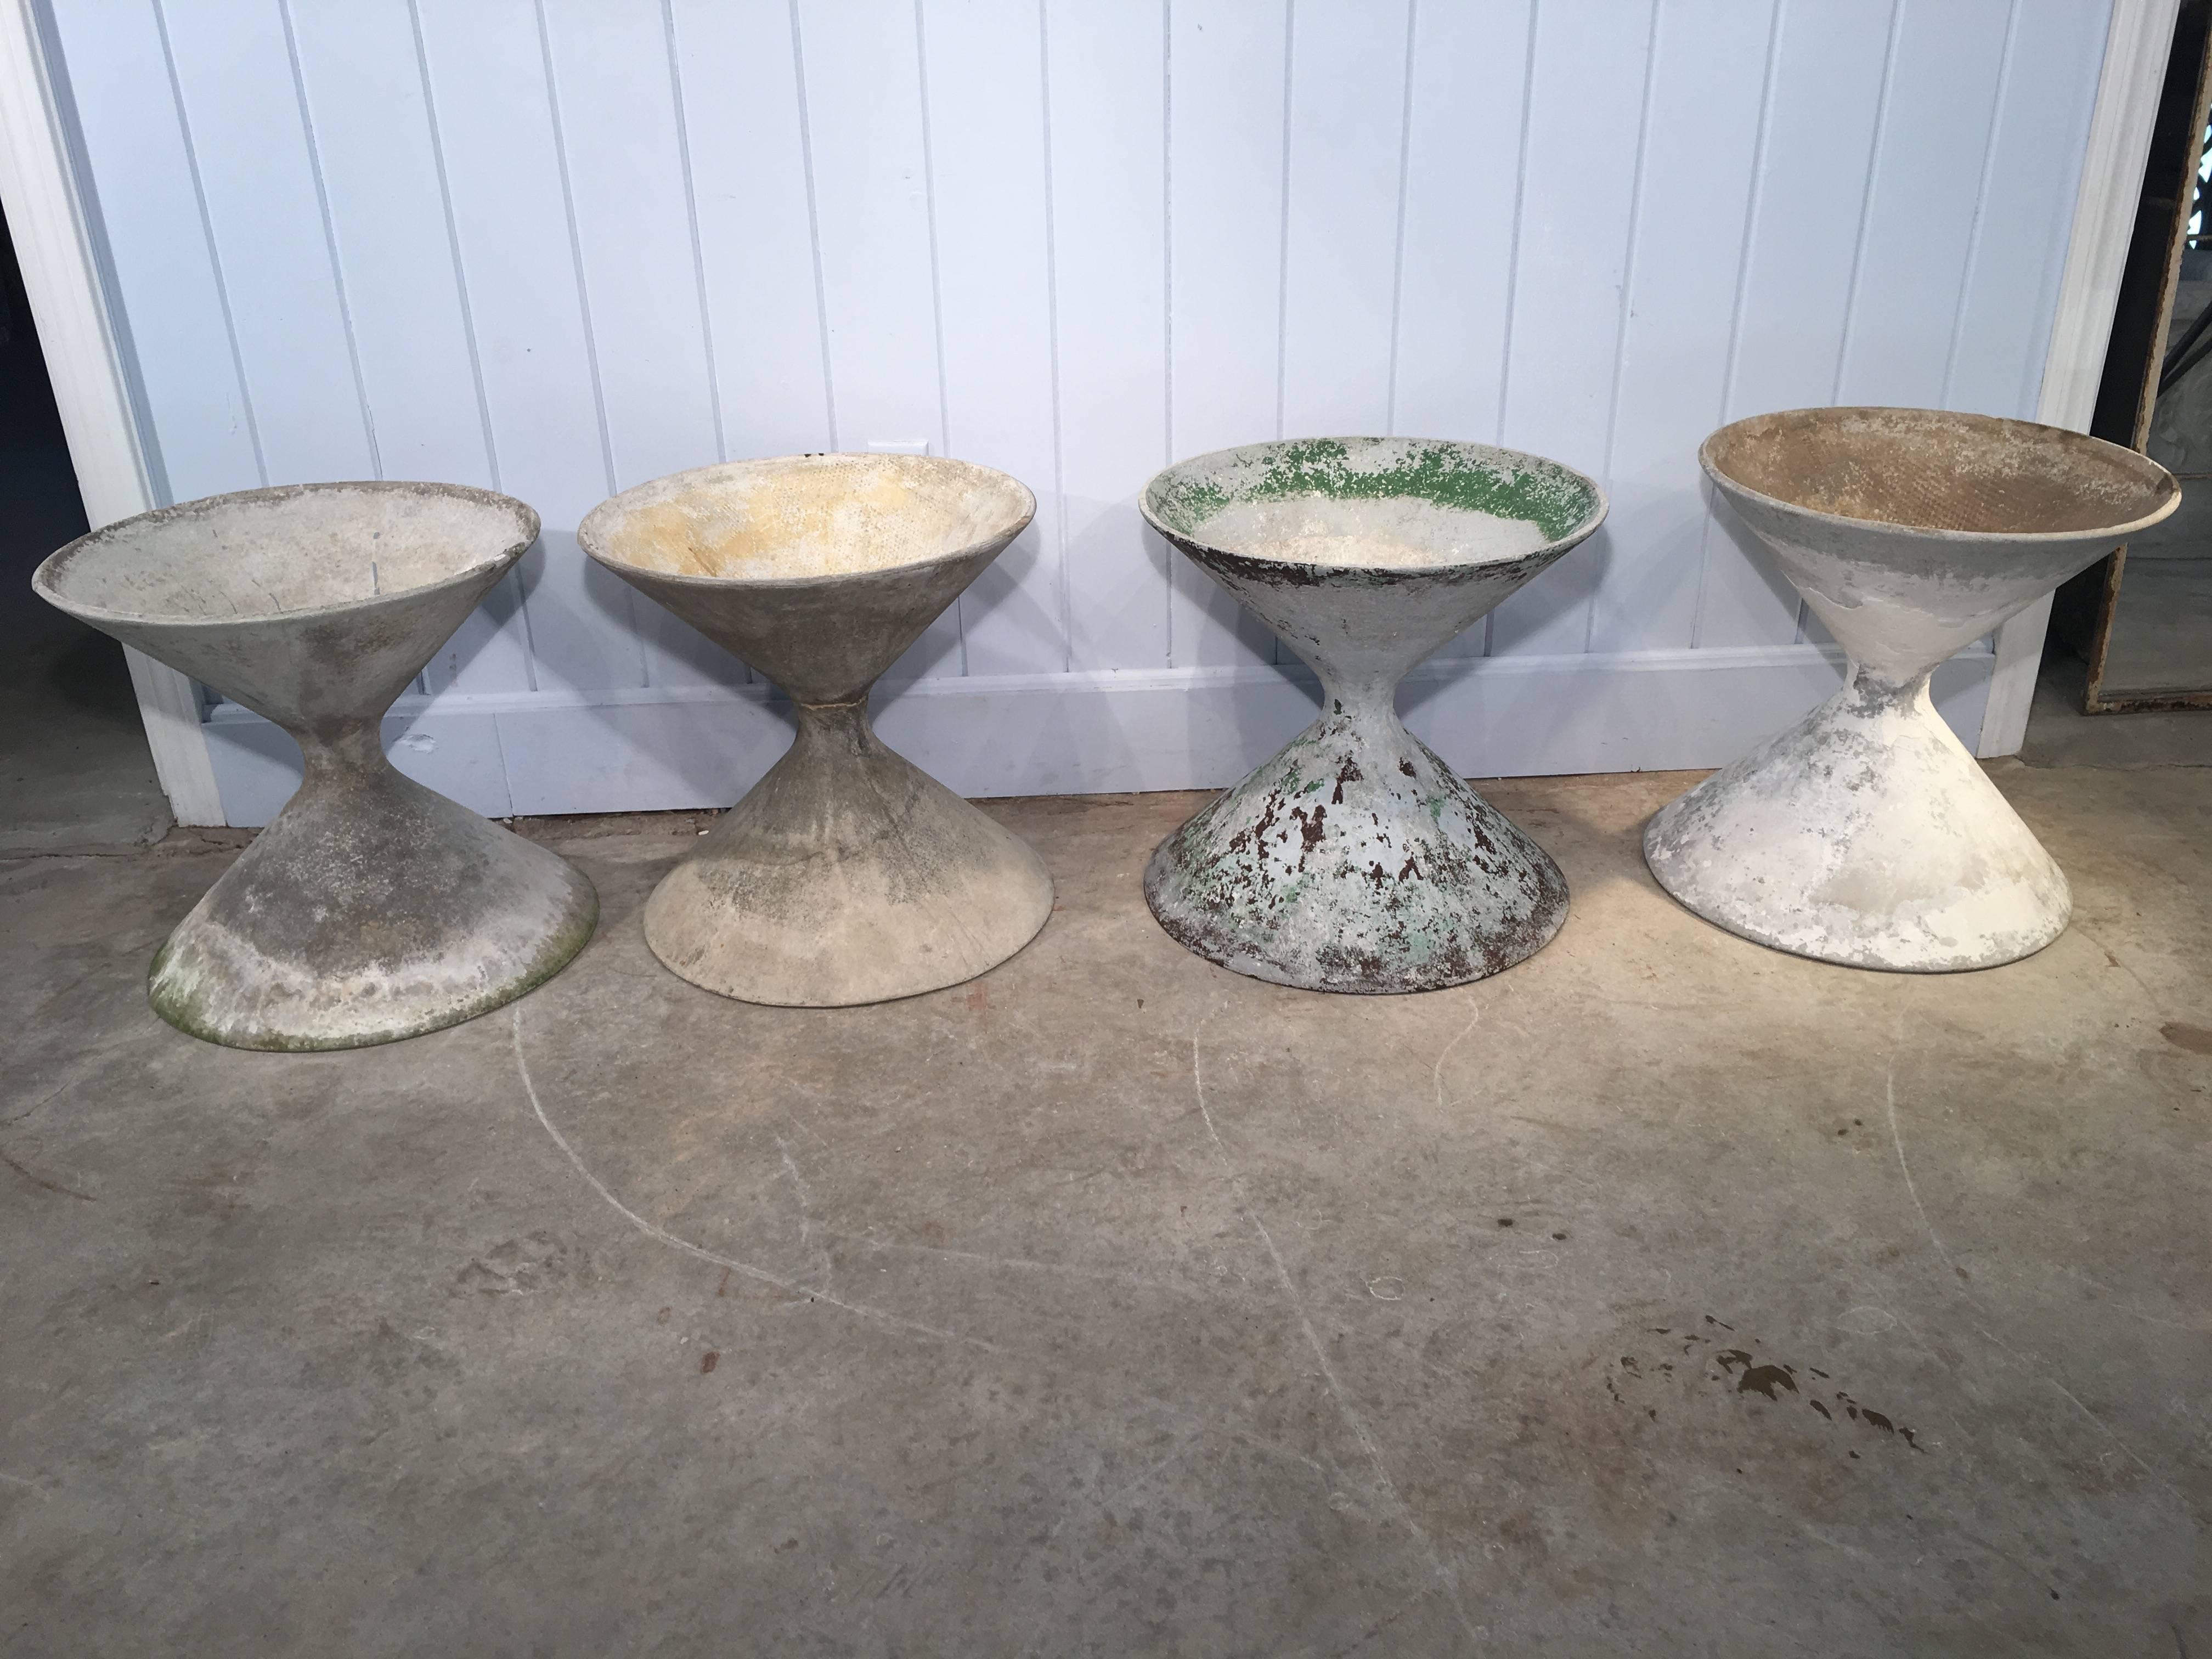 Designed by the iconic Willy Guhl and Anton Bee in the early 1950s, and made of fiber cement by Eternit, AG, these planters sport various shades of old, weathered paint and are in excellent condition. Grouped together, they make a stunning statement